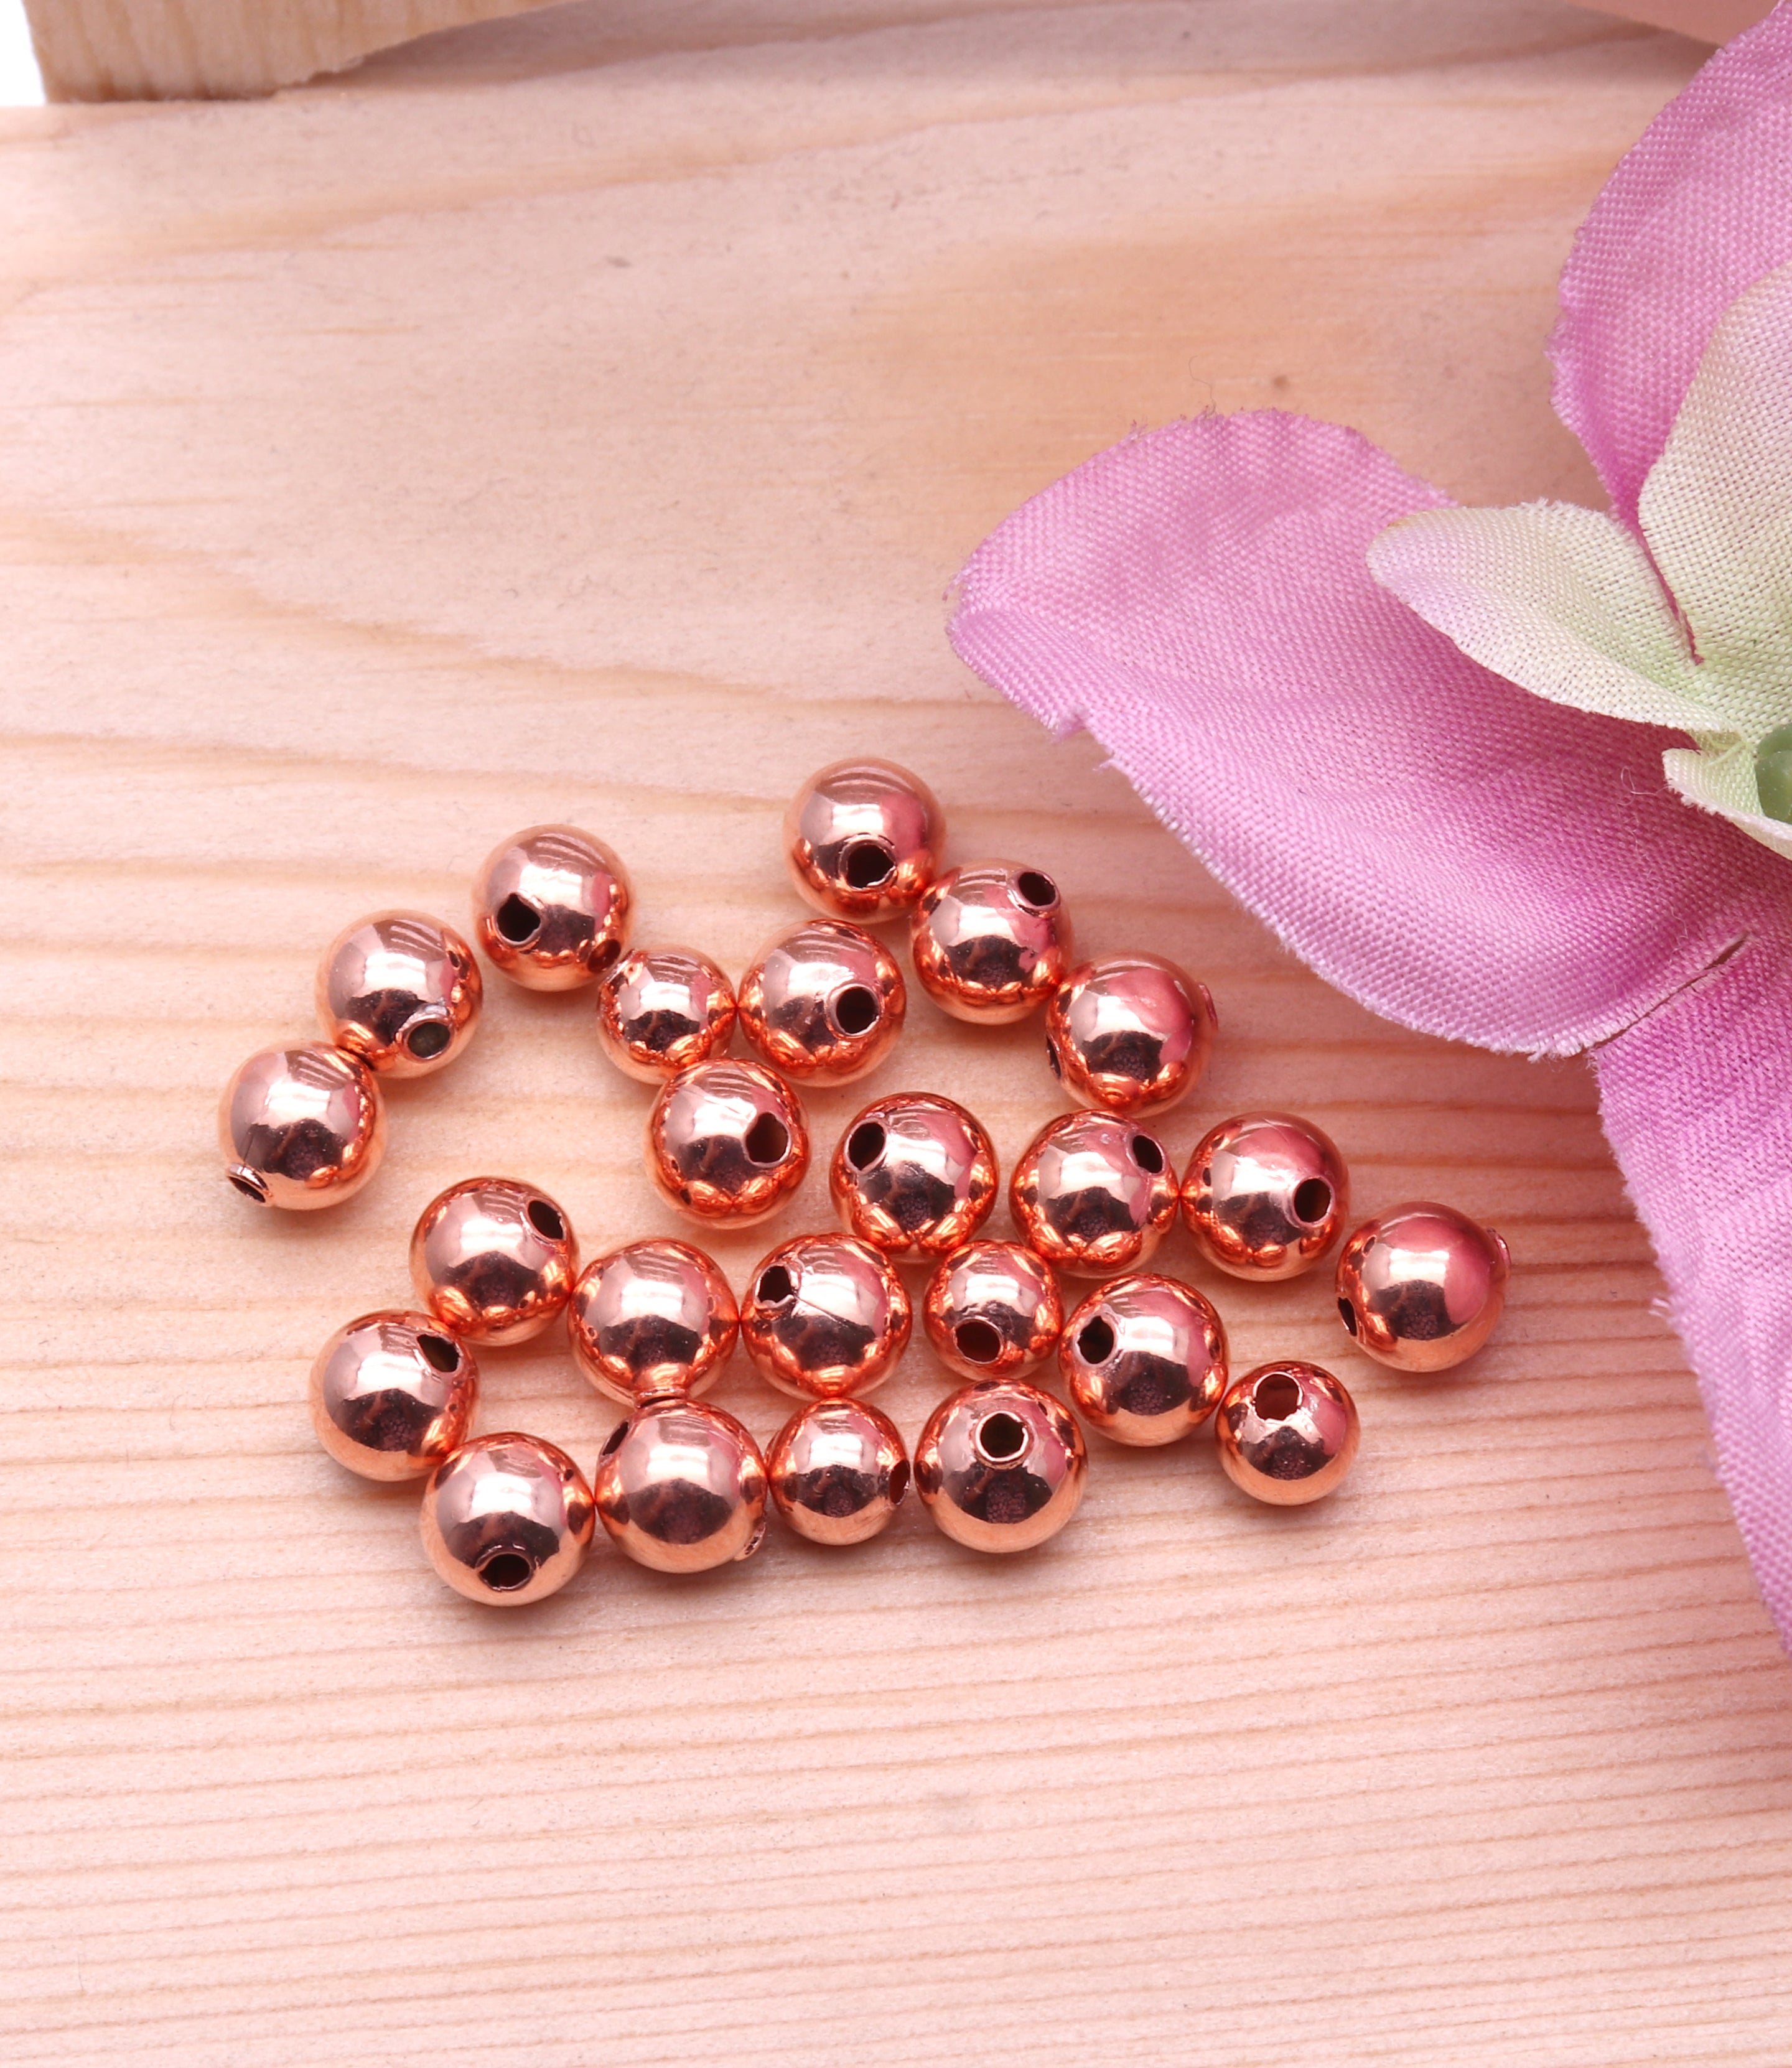 5pc Lot Bead Finding 6mm Round Ball Jewelry Making Charm (Pick Your Plating) - GemMartUSA